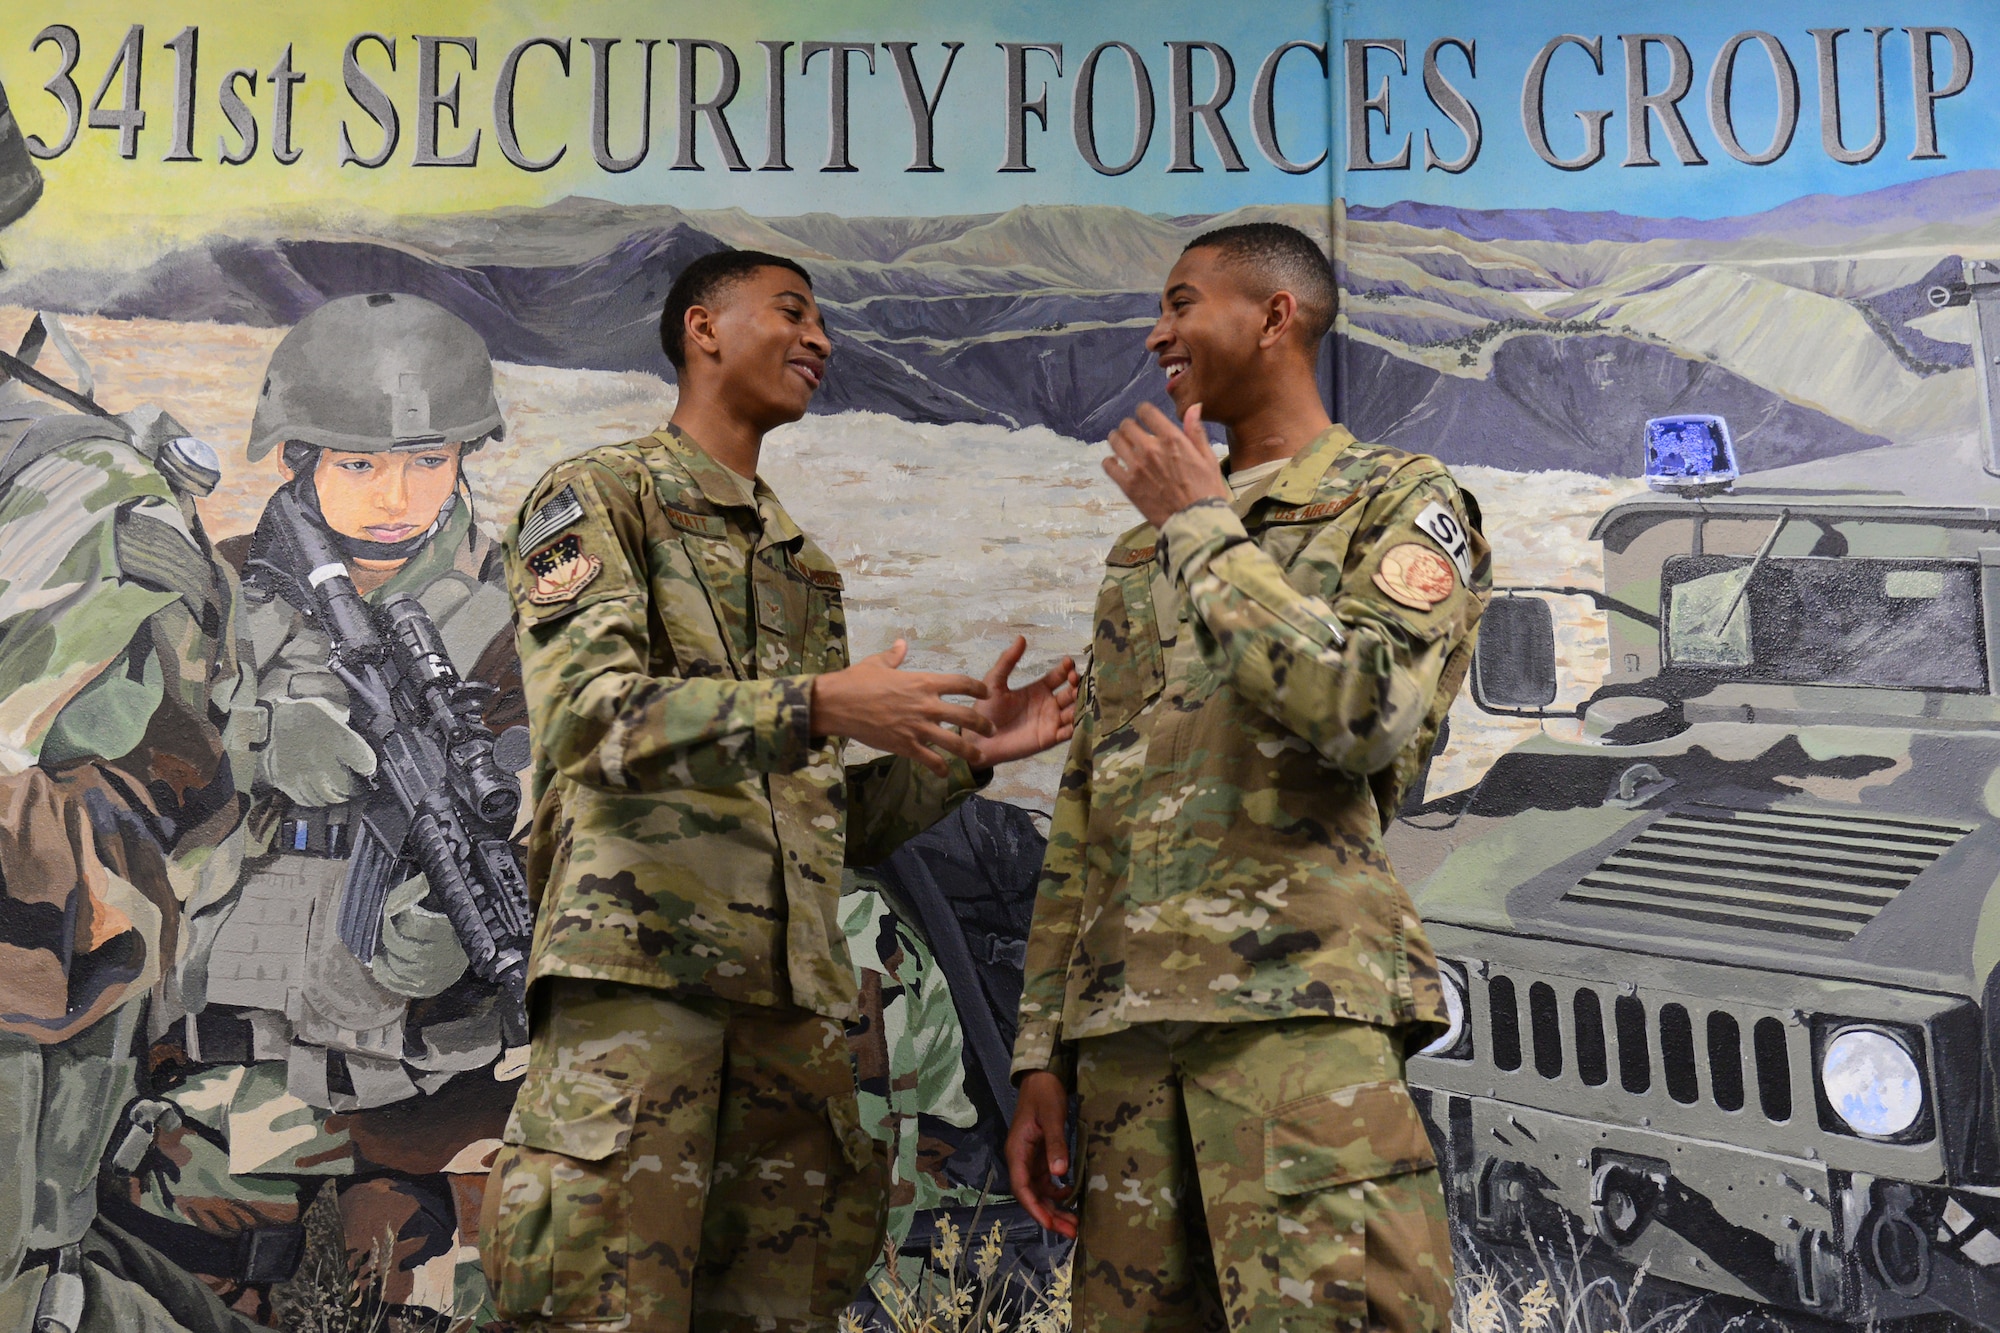 Airman 1st Class Leland, left, and Airman 1st Class Lemuel Spratt, 341st Missile Security Forces Squadron members, share a joke July 19, 2018, at Malmstrom Air Force Base, Mont.